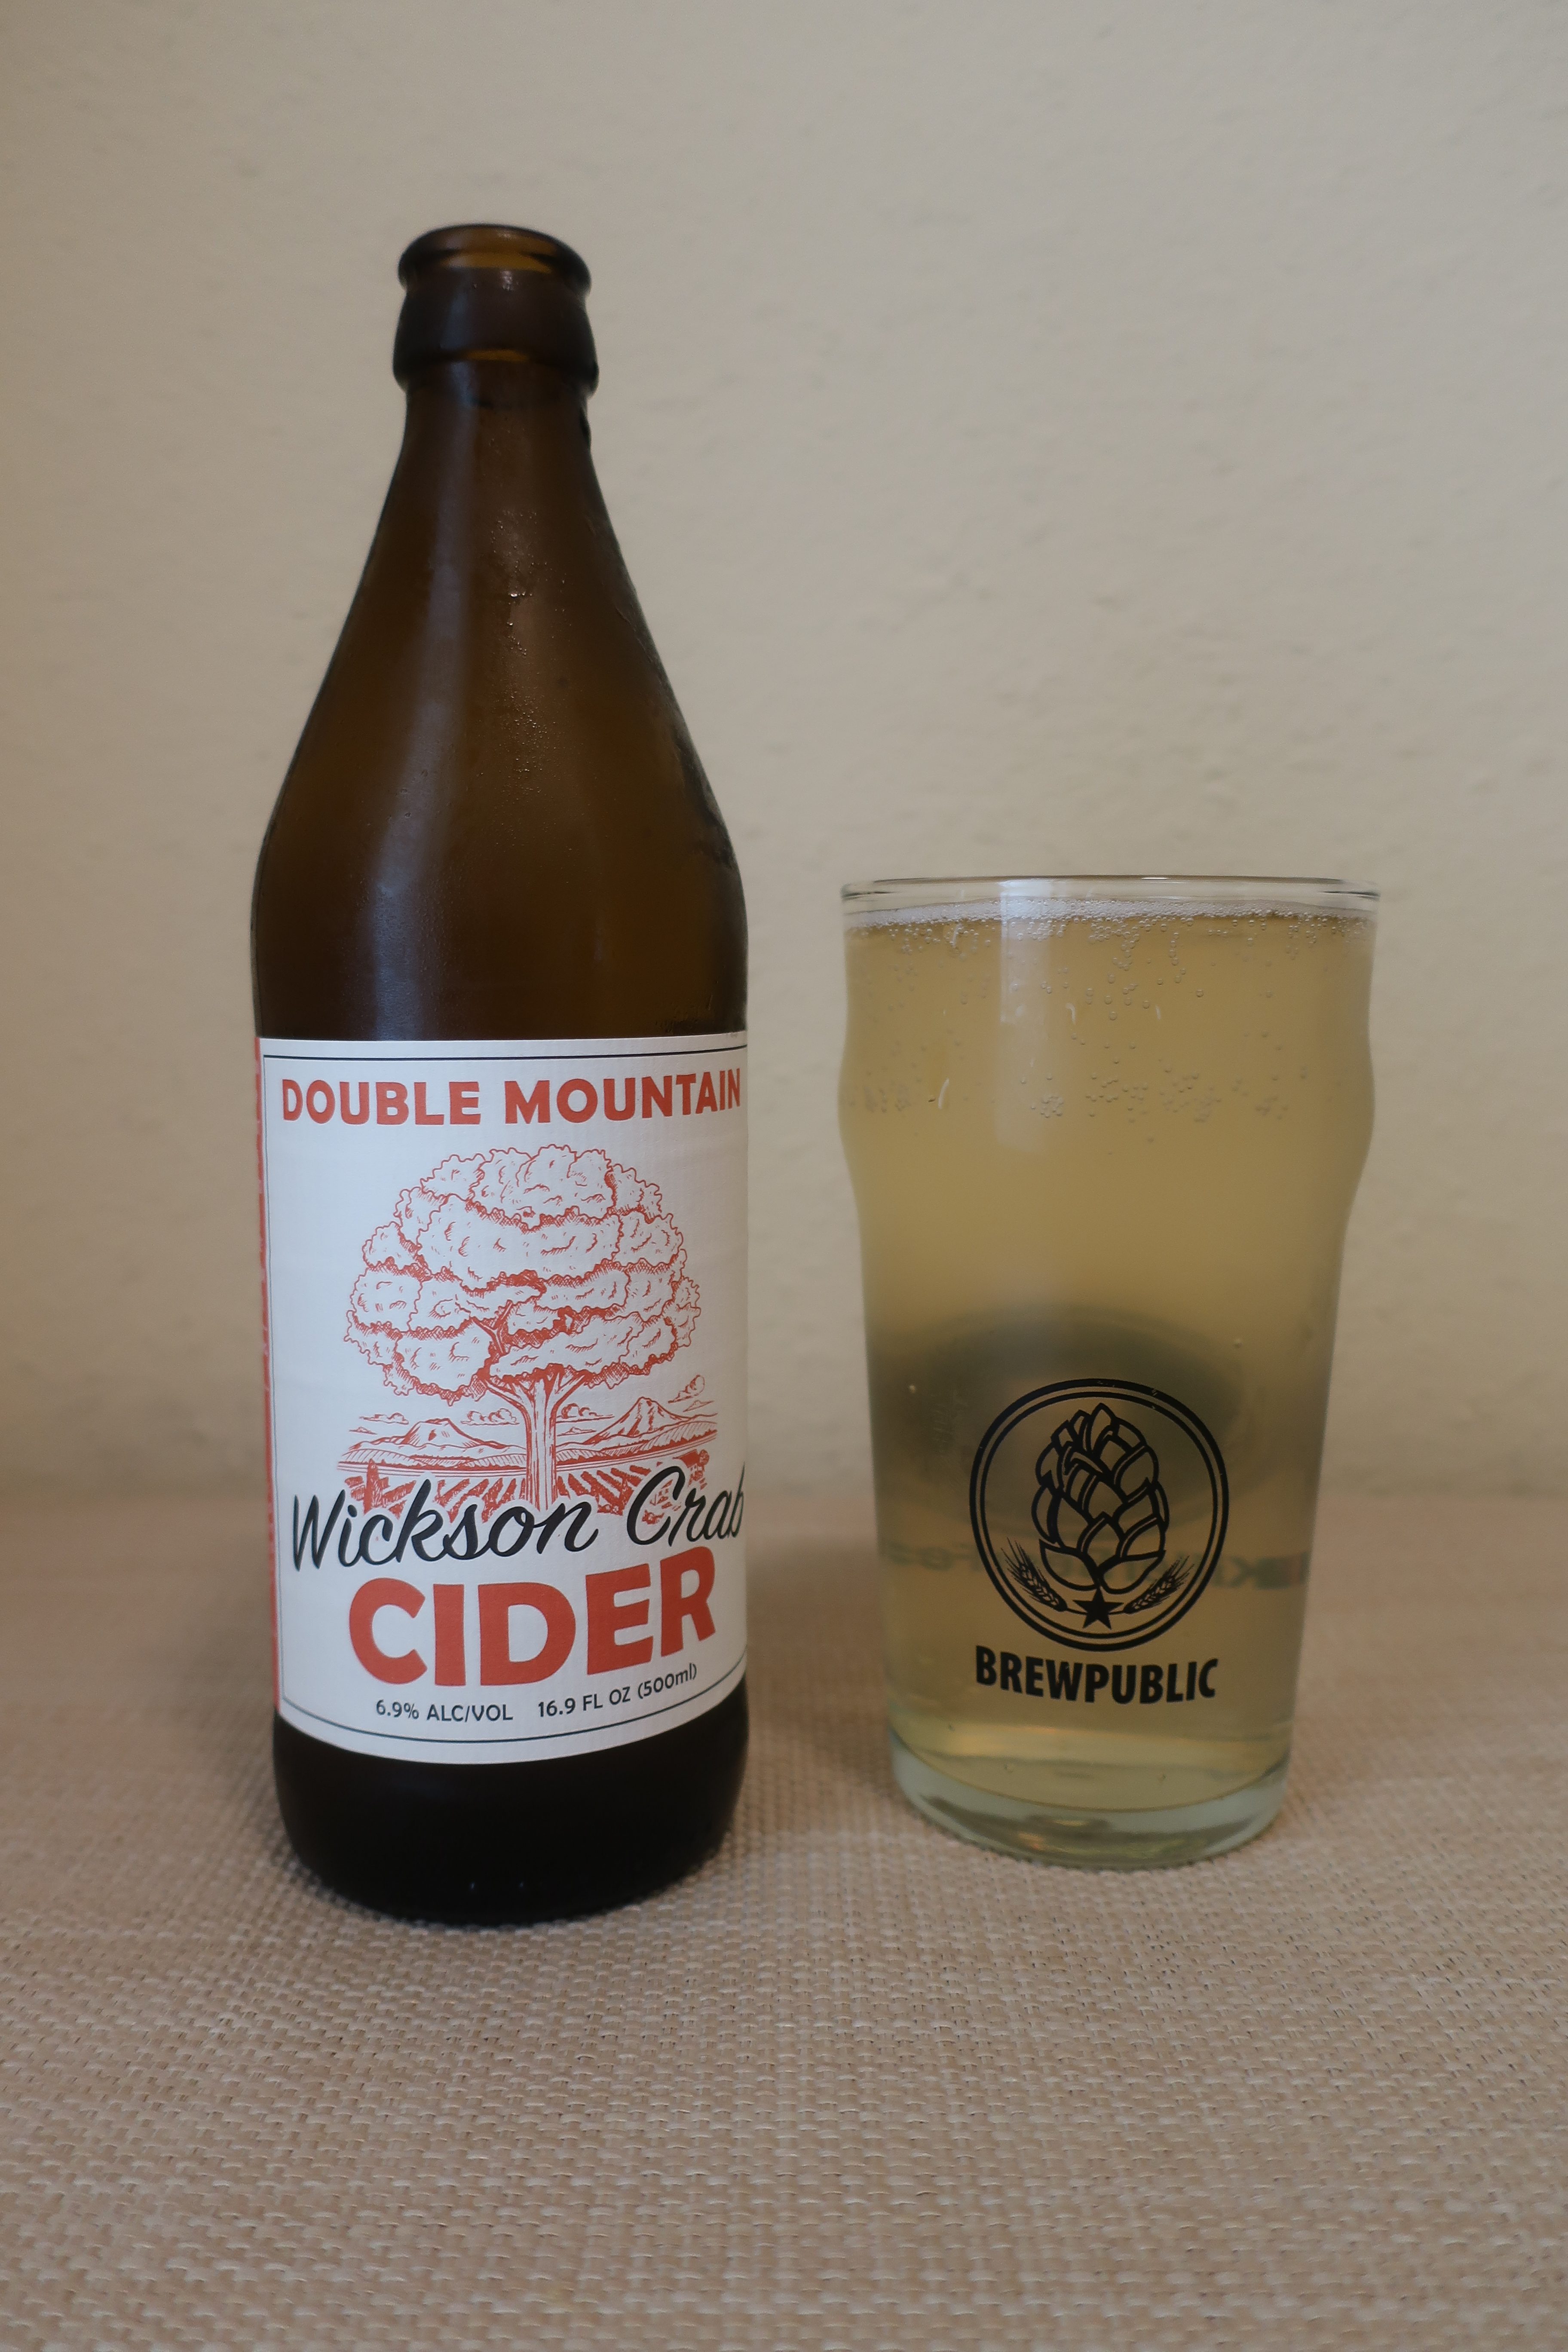 Double Mountain Wickson Crab Cider served in a BREWPUBLIC glass.